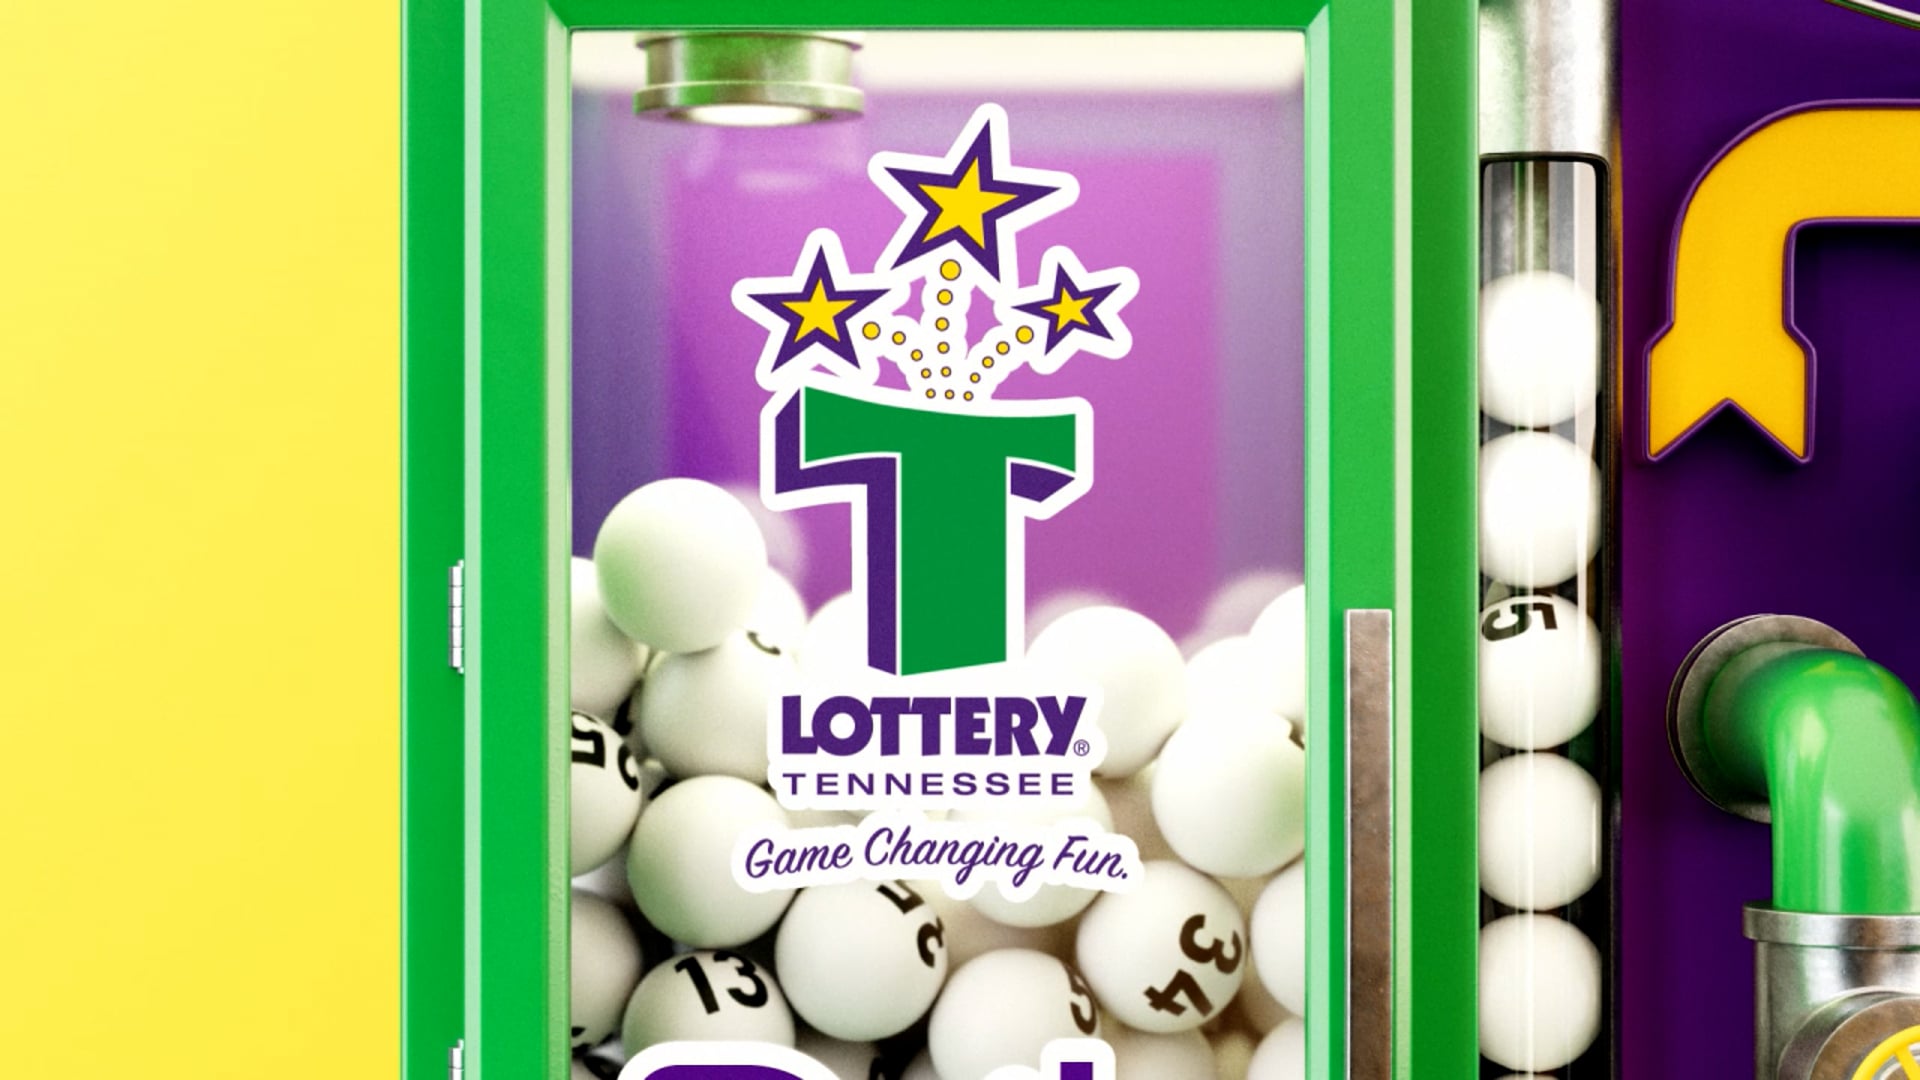 Tennessee Lottery "Daily Jackpot" Package